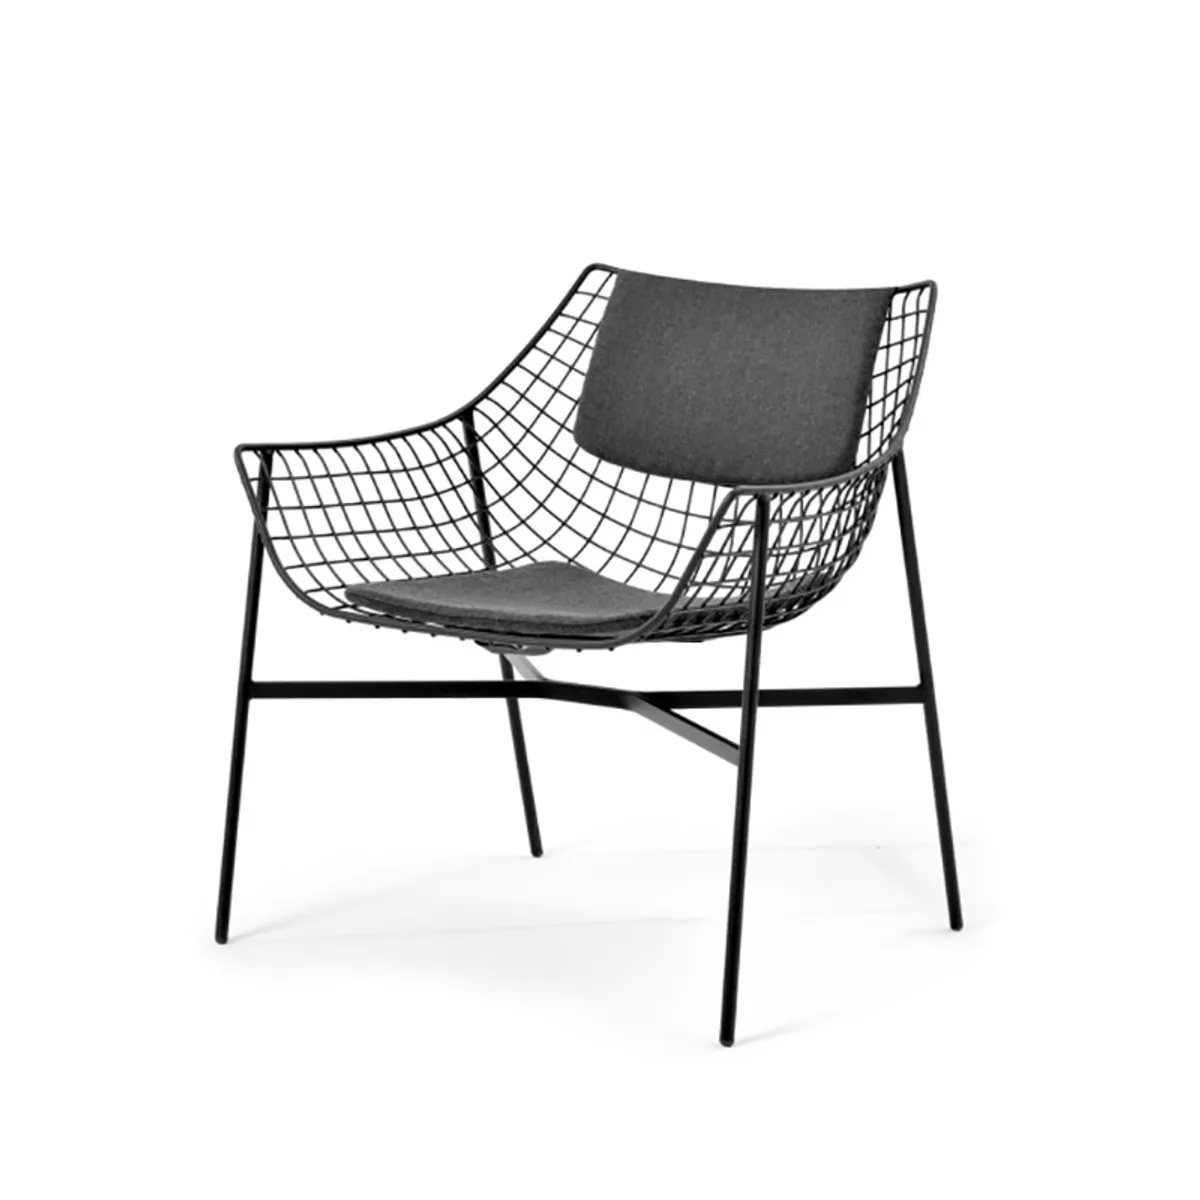 Summer Black Metal Lounge Chair With Seat Pad For Outside Bars And Restaurants 070